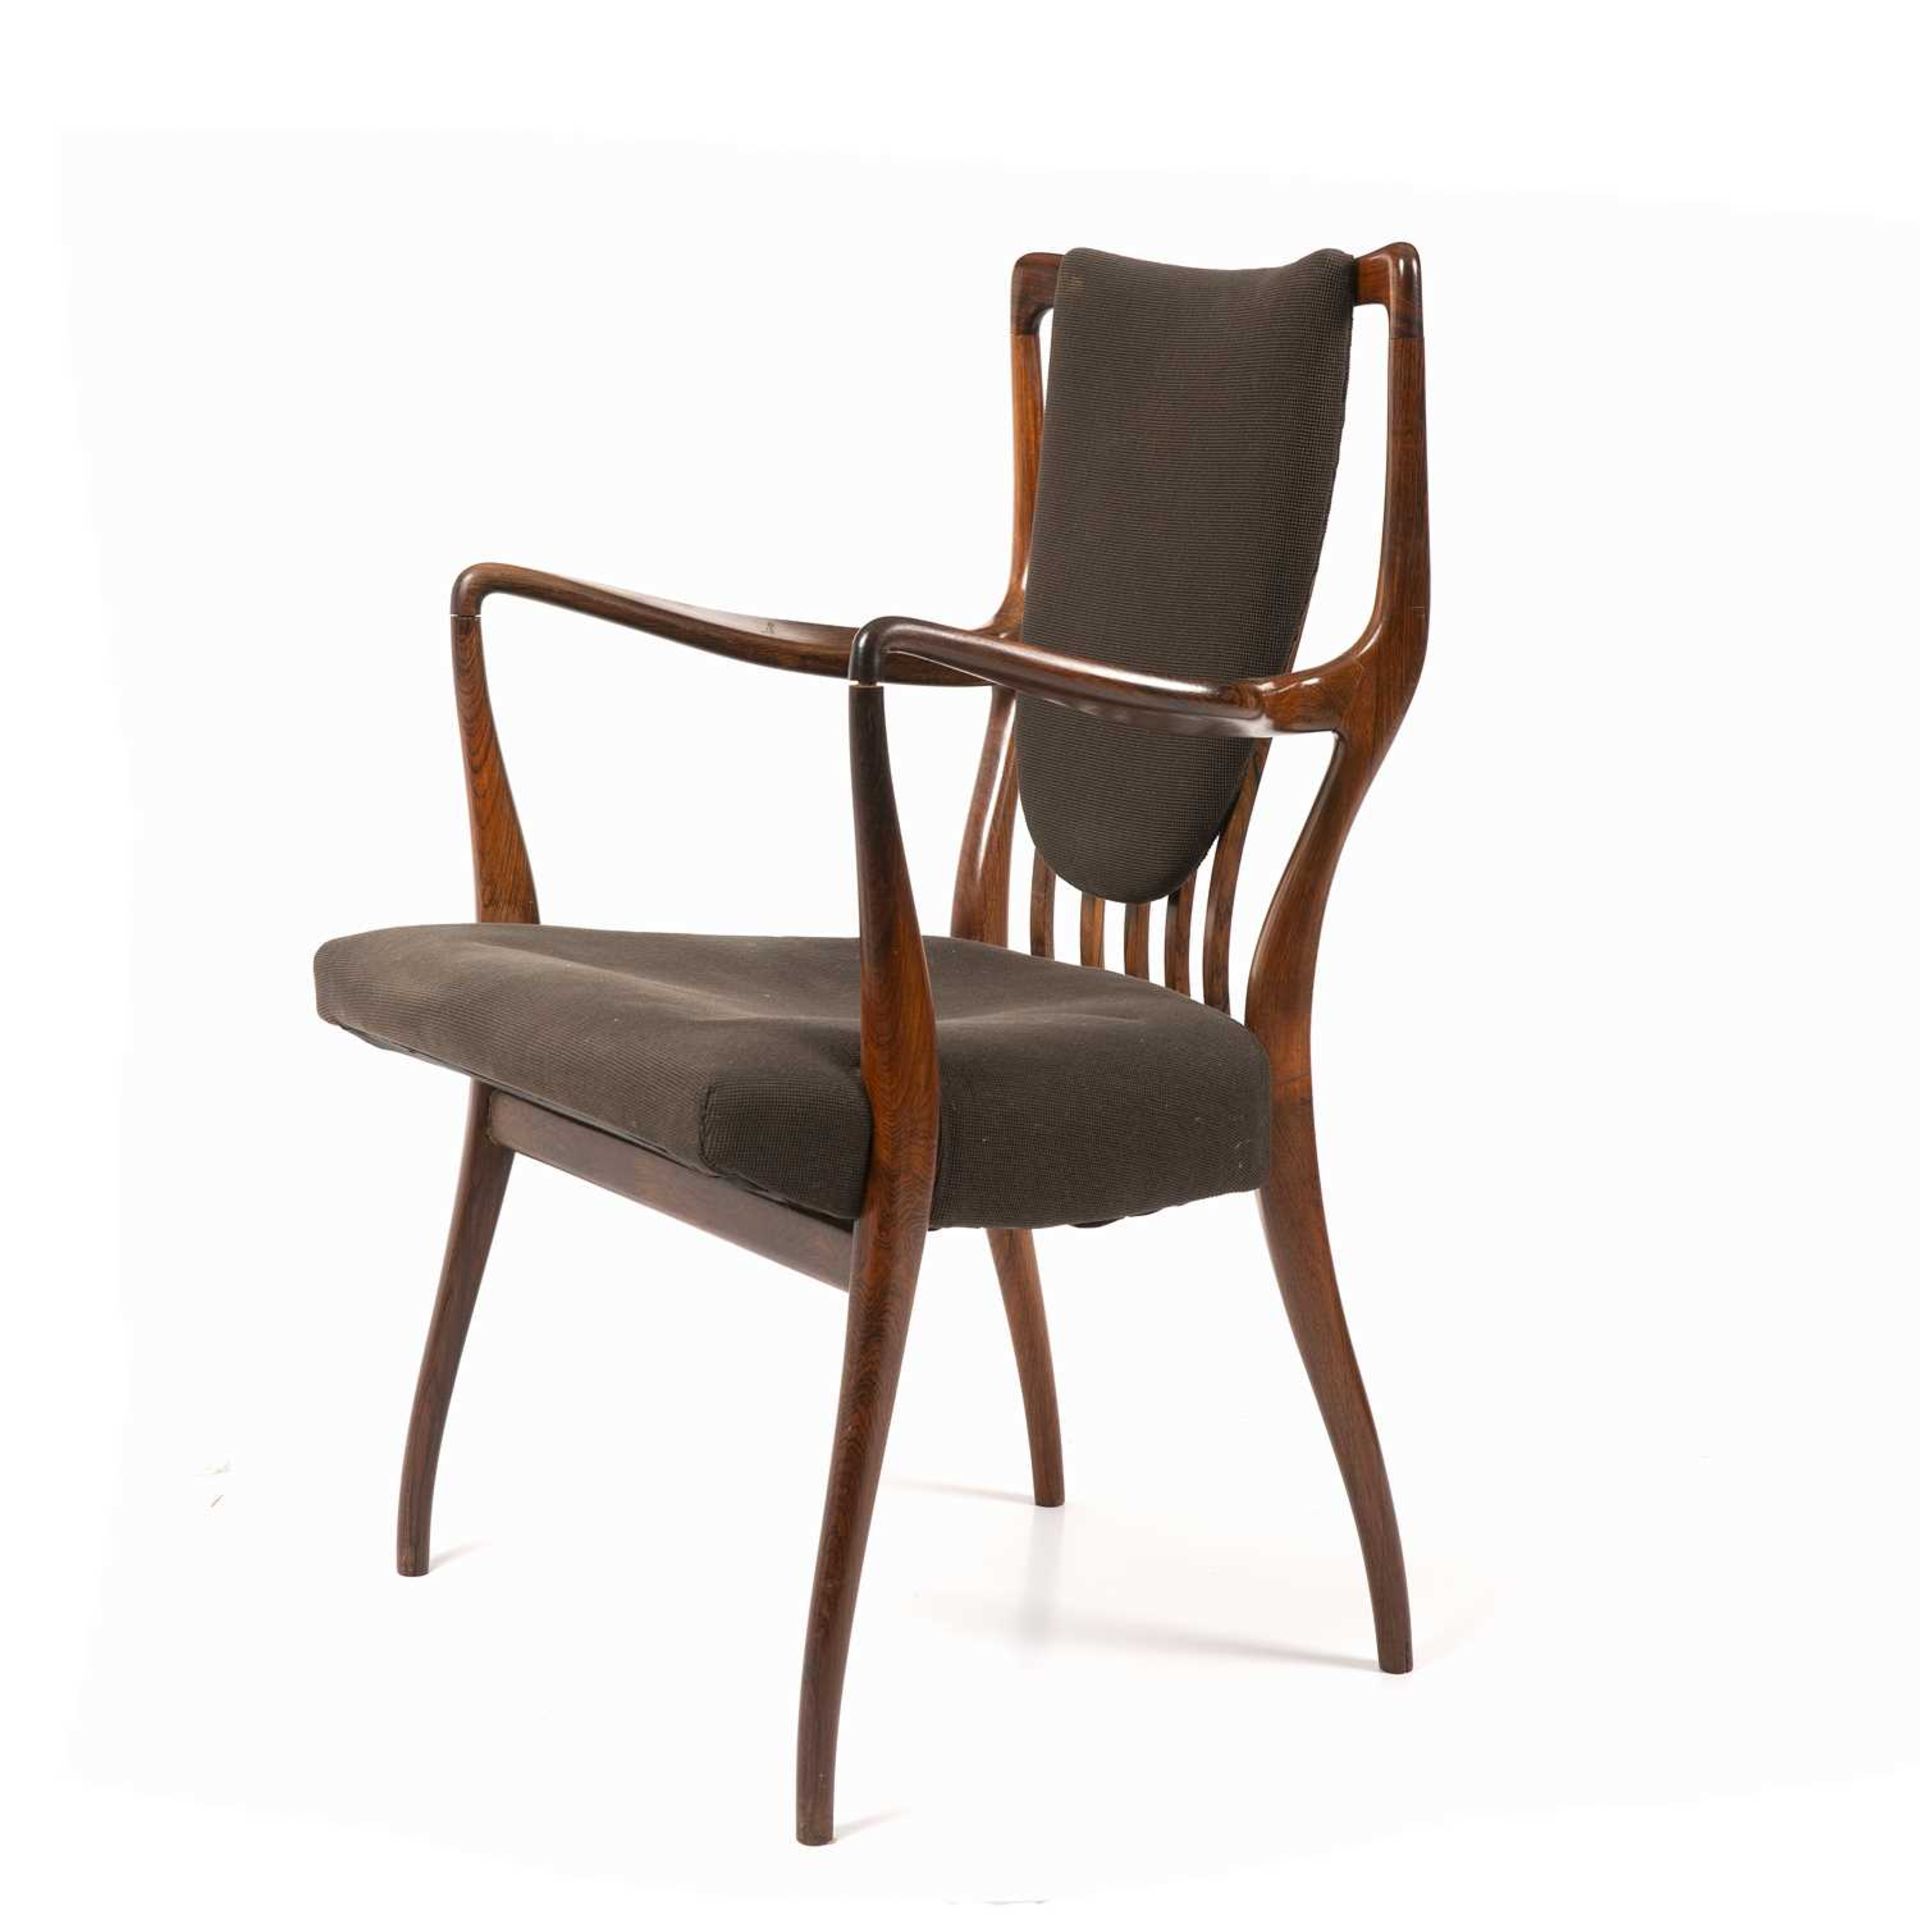 Andrew John Milne Armchair with upholstered seat 91cm high, 56cm wide, 52cm deep.